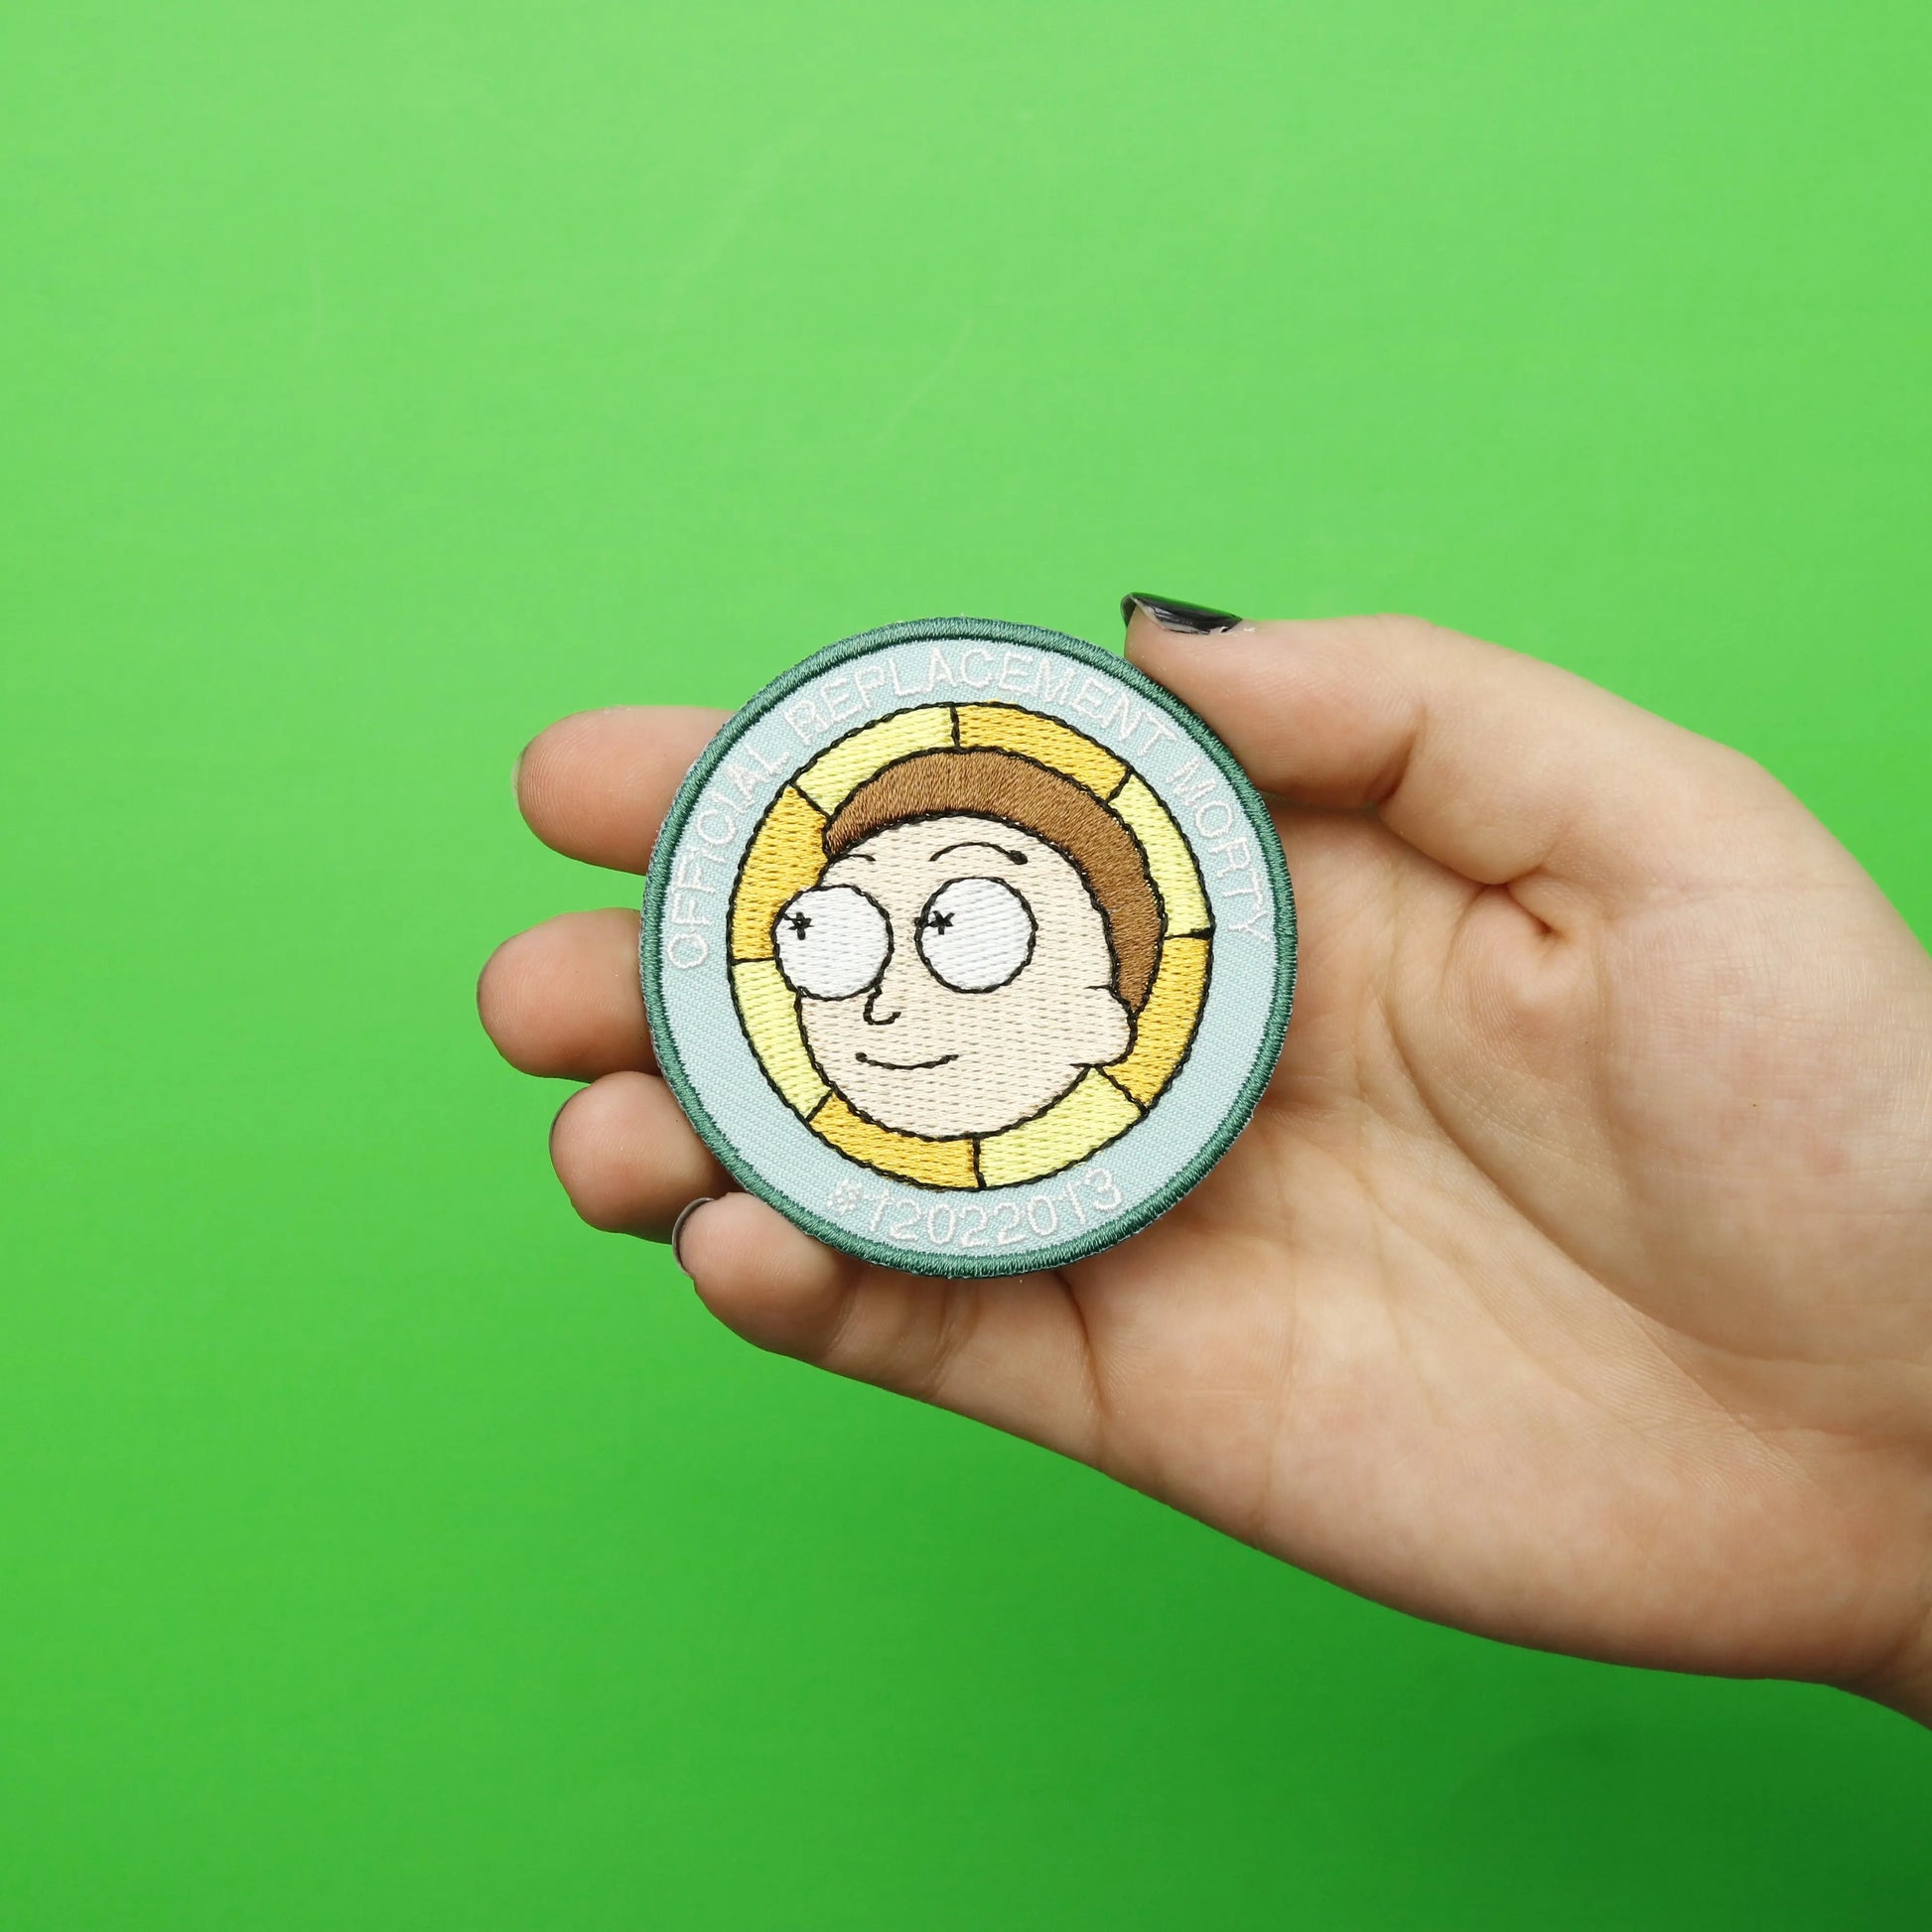 Rick and Morty 'Official Replacement Morty' Badge Embroidered Iron On Patch 